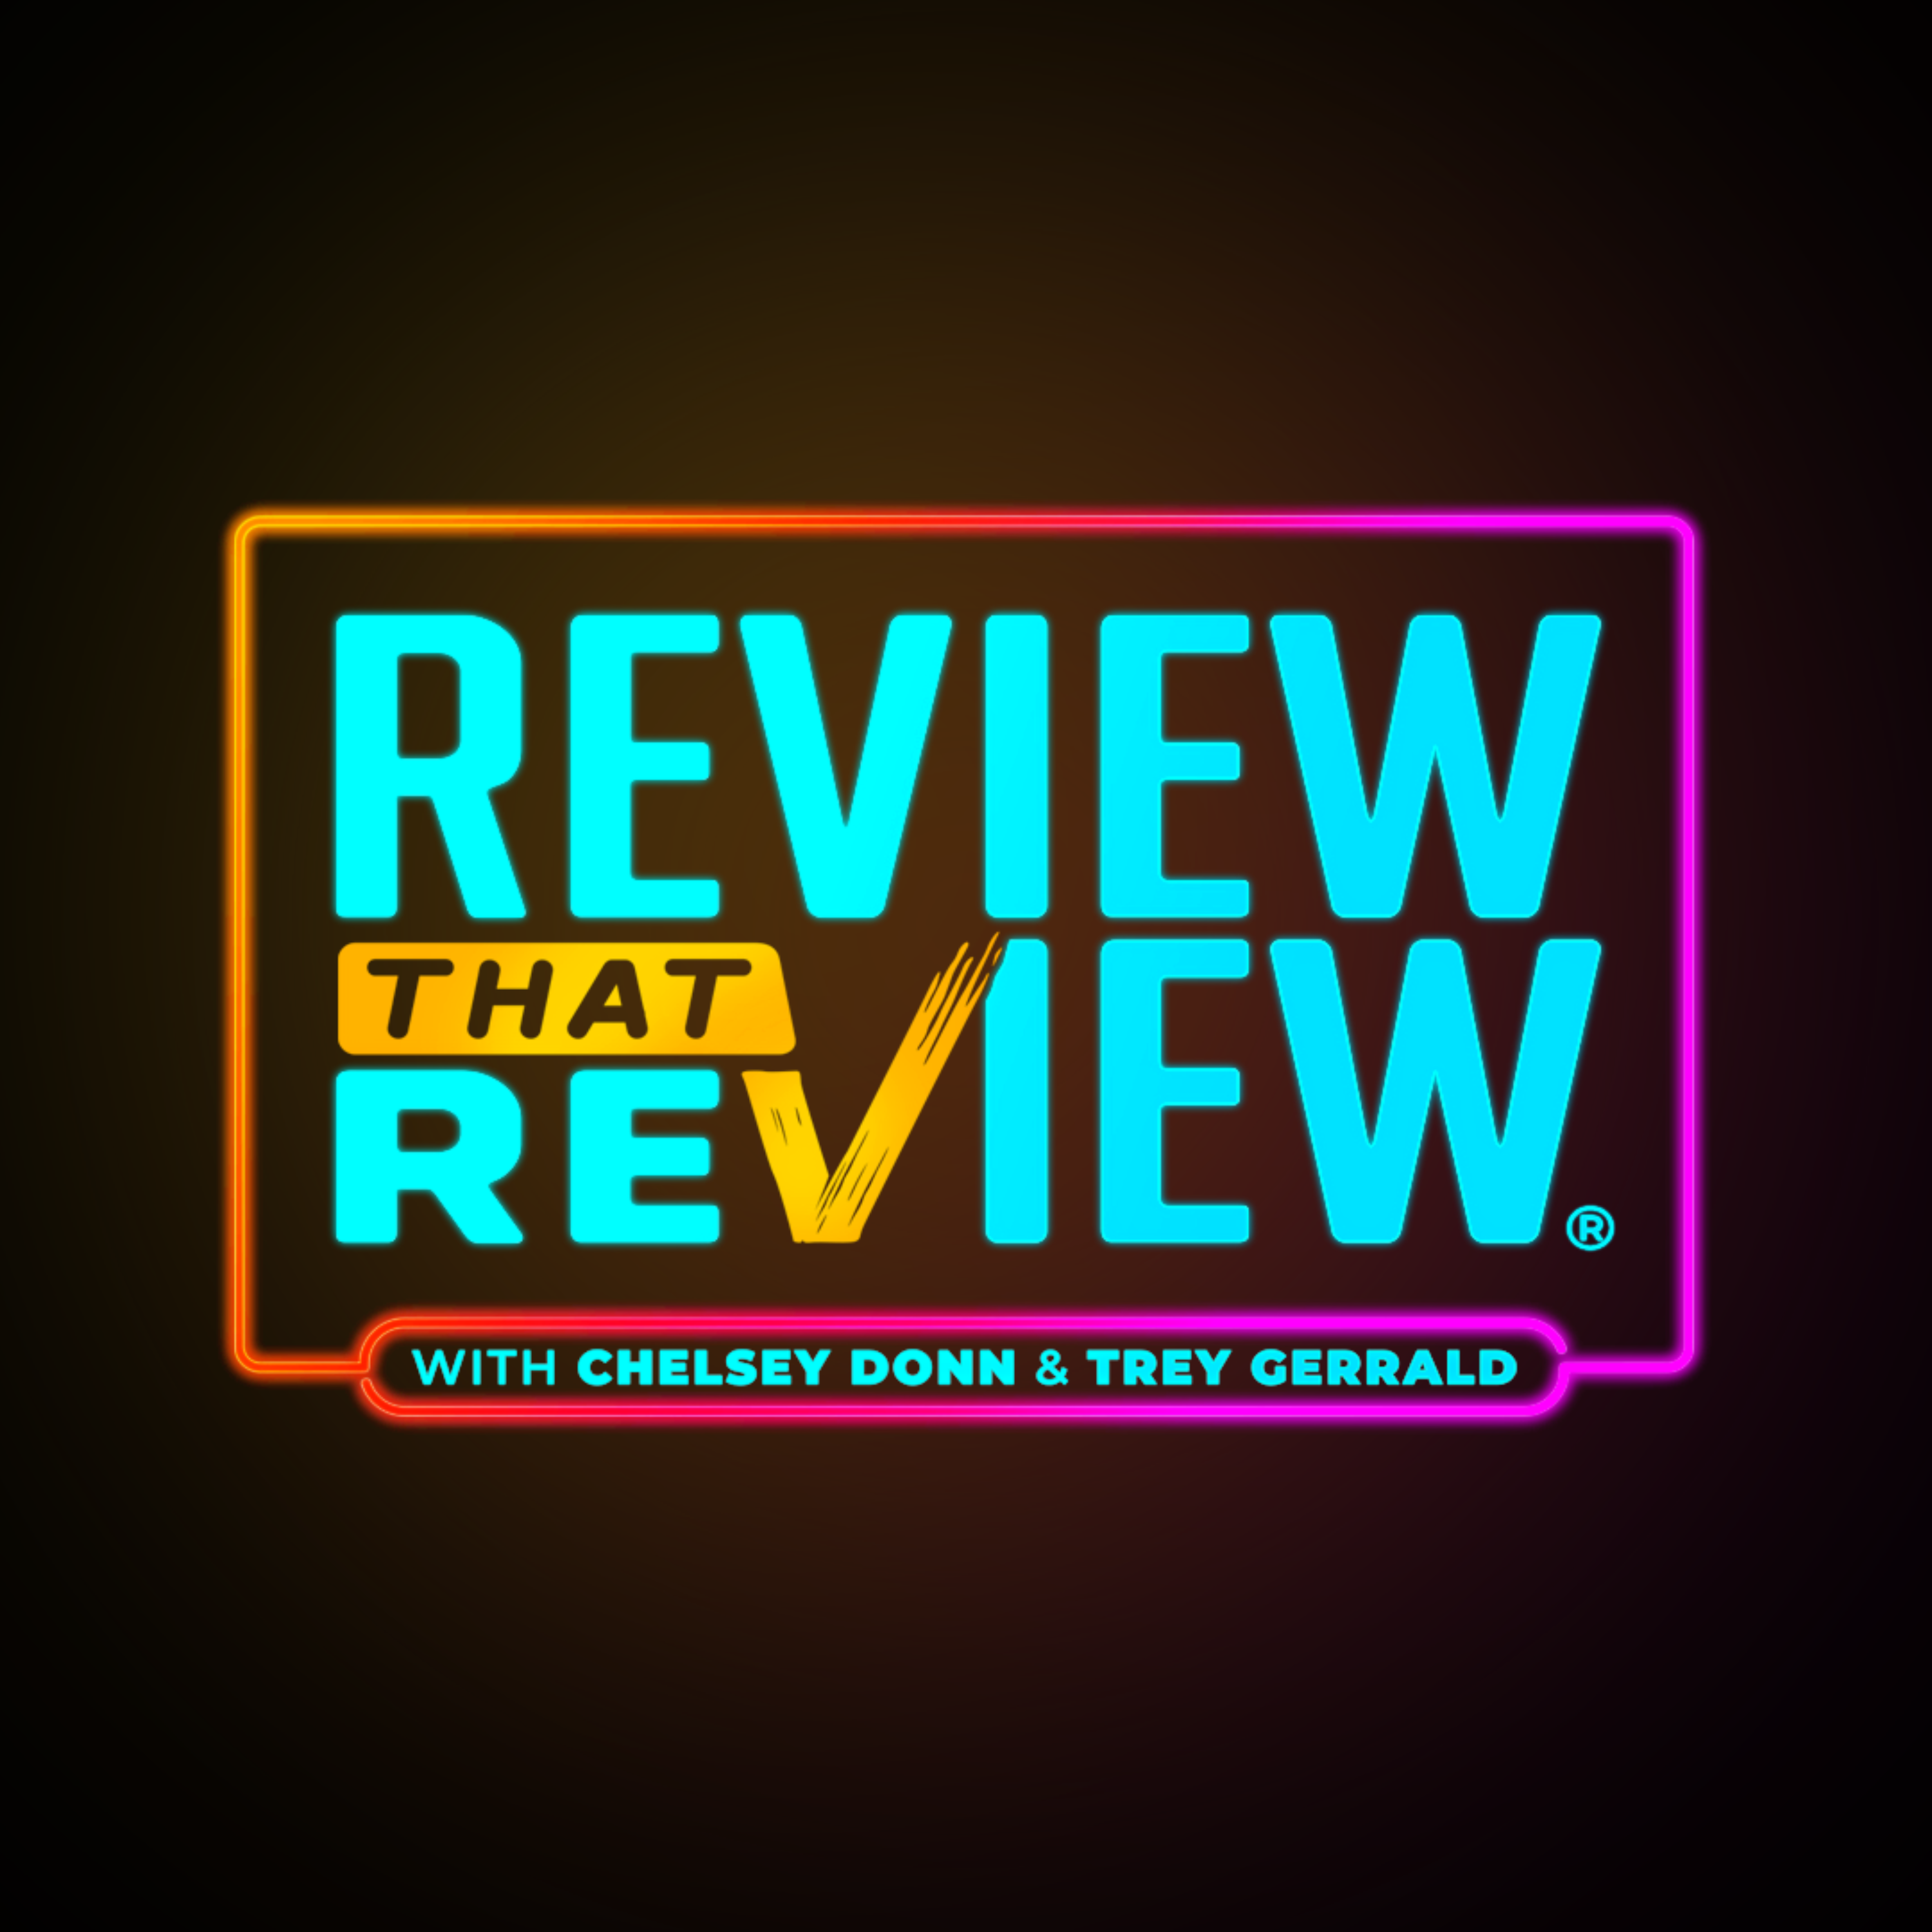 Artwork for Review That Review with Chelsey Donn & Trey Gerrald